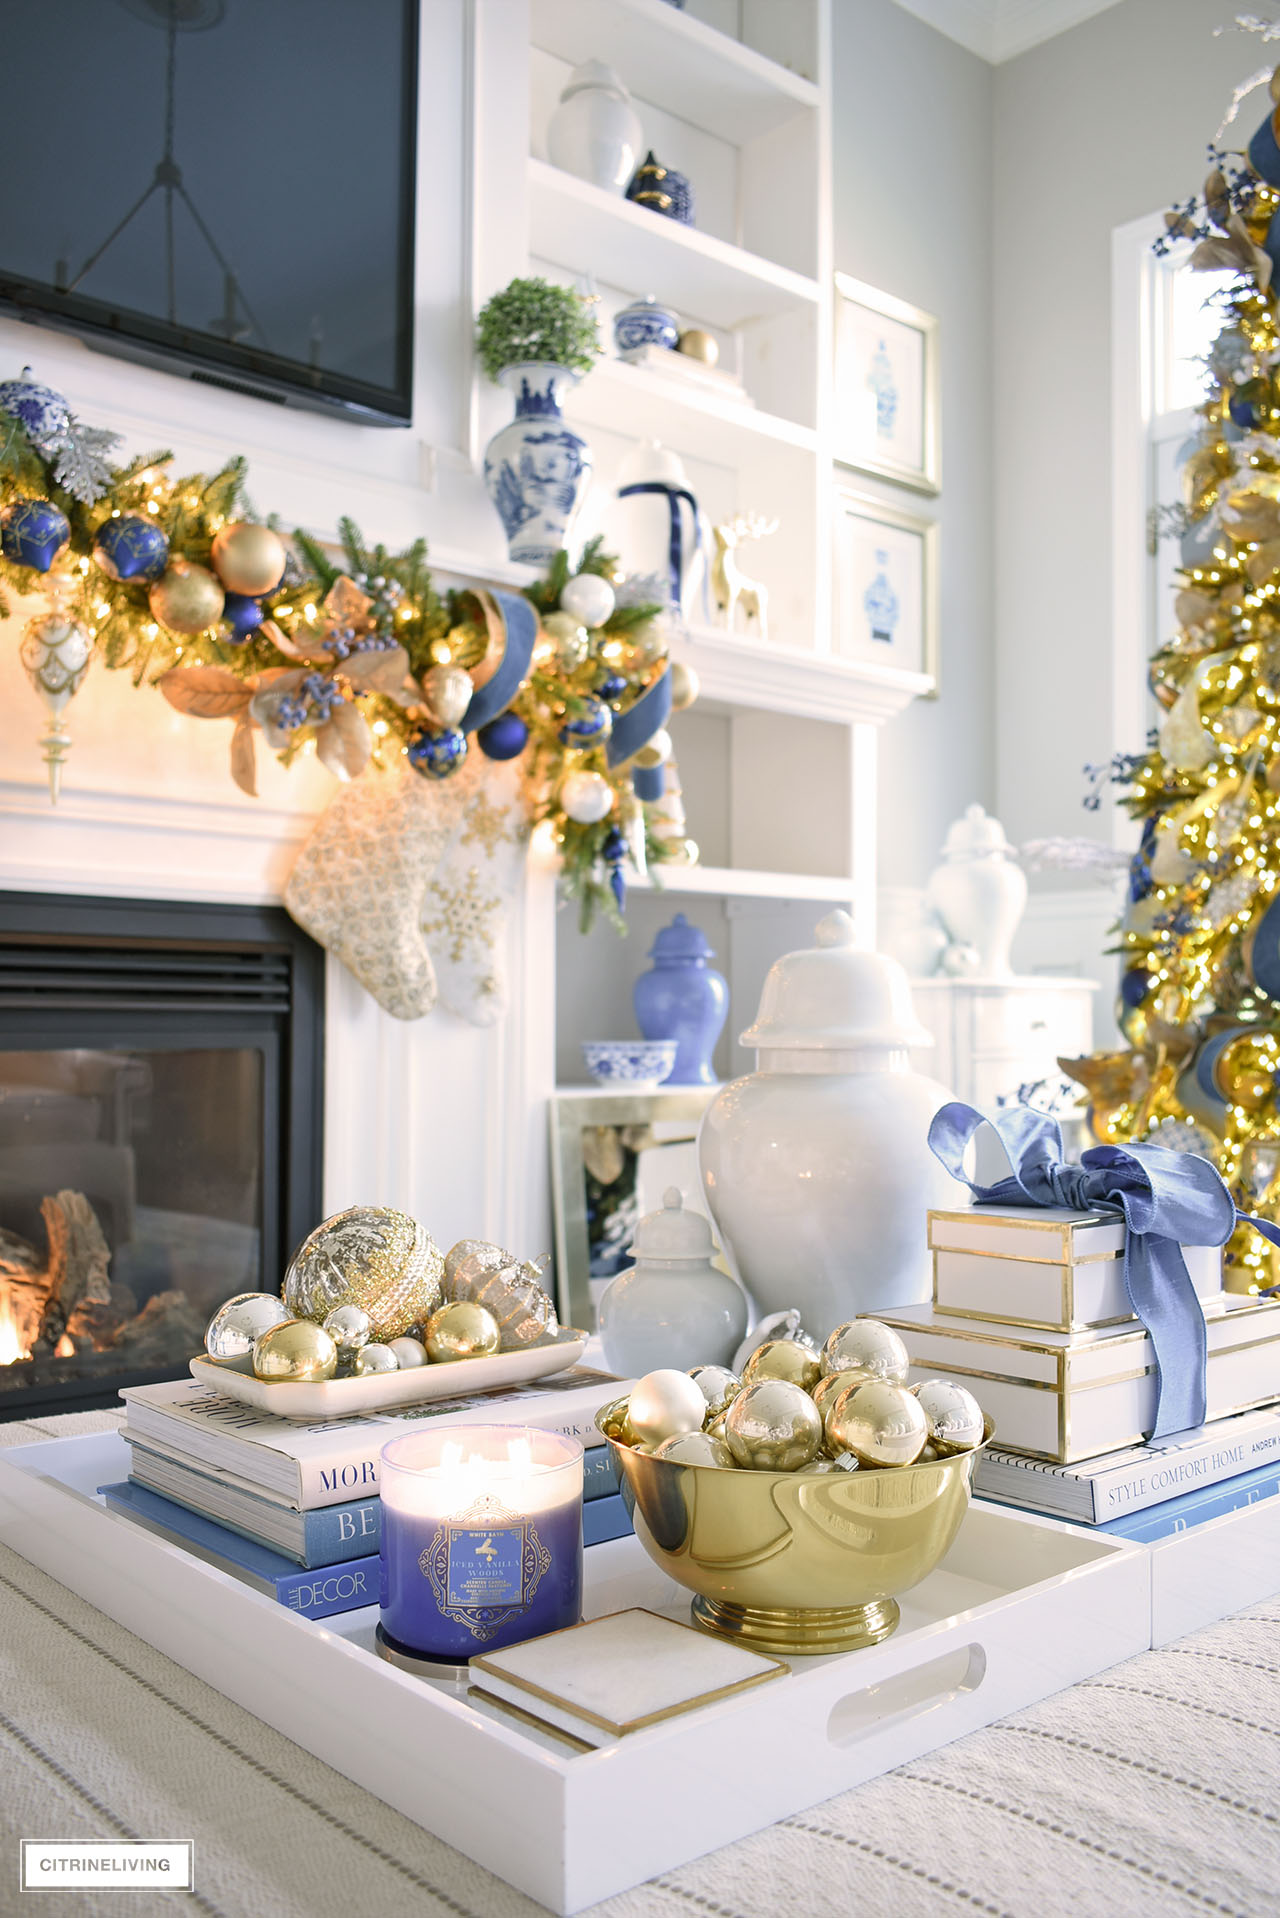 Living room ottoman styled for Christmas with white trays and blue and gold accessories, ornaments, ginger jars, candle and gift box.